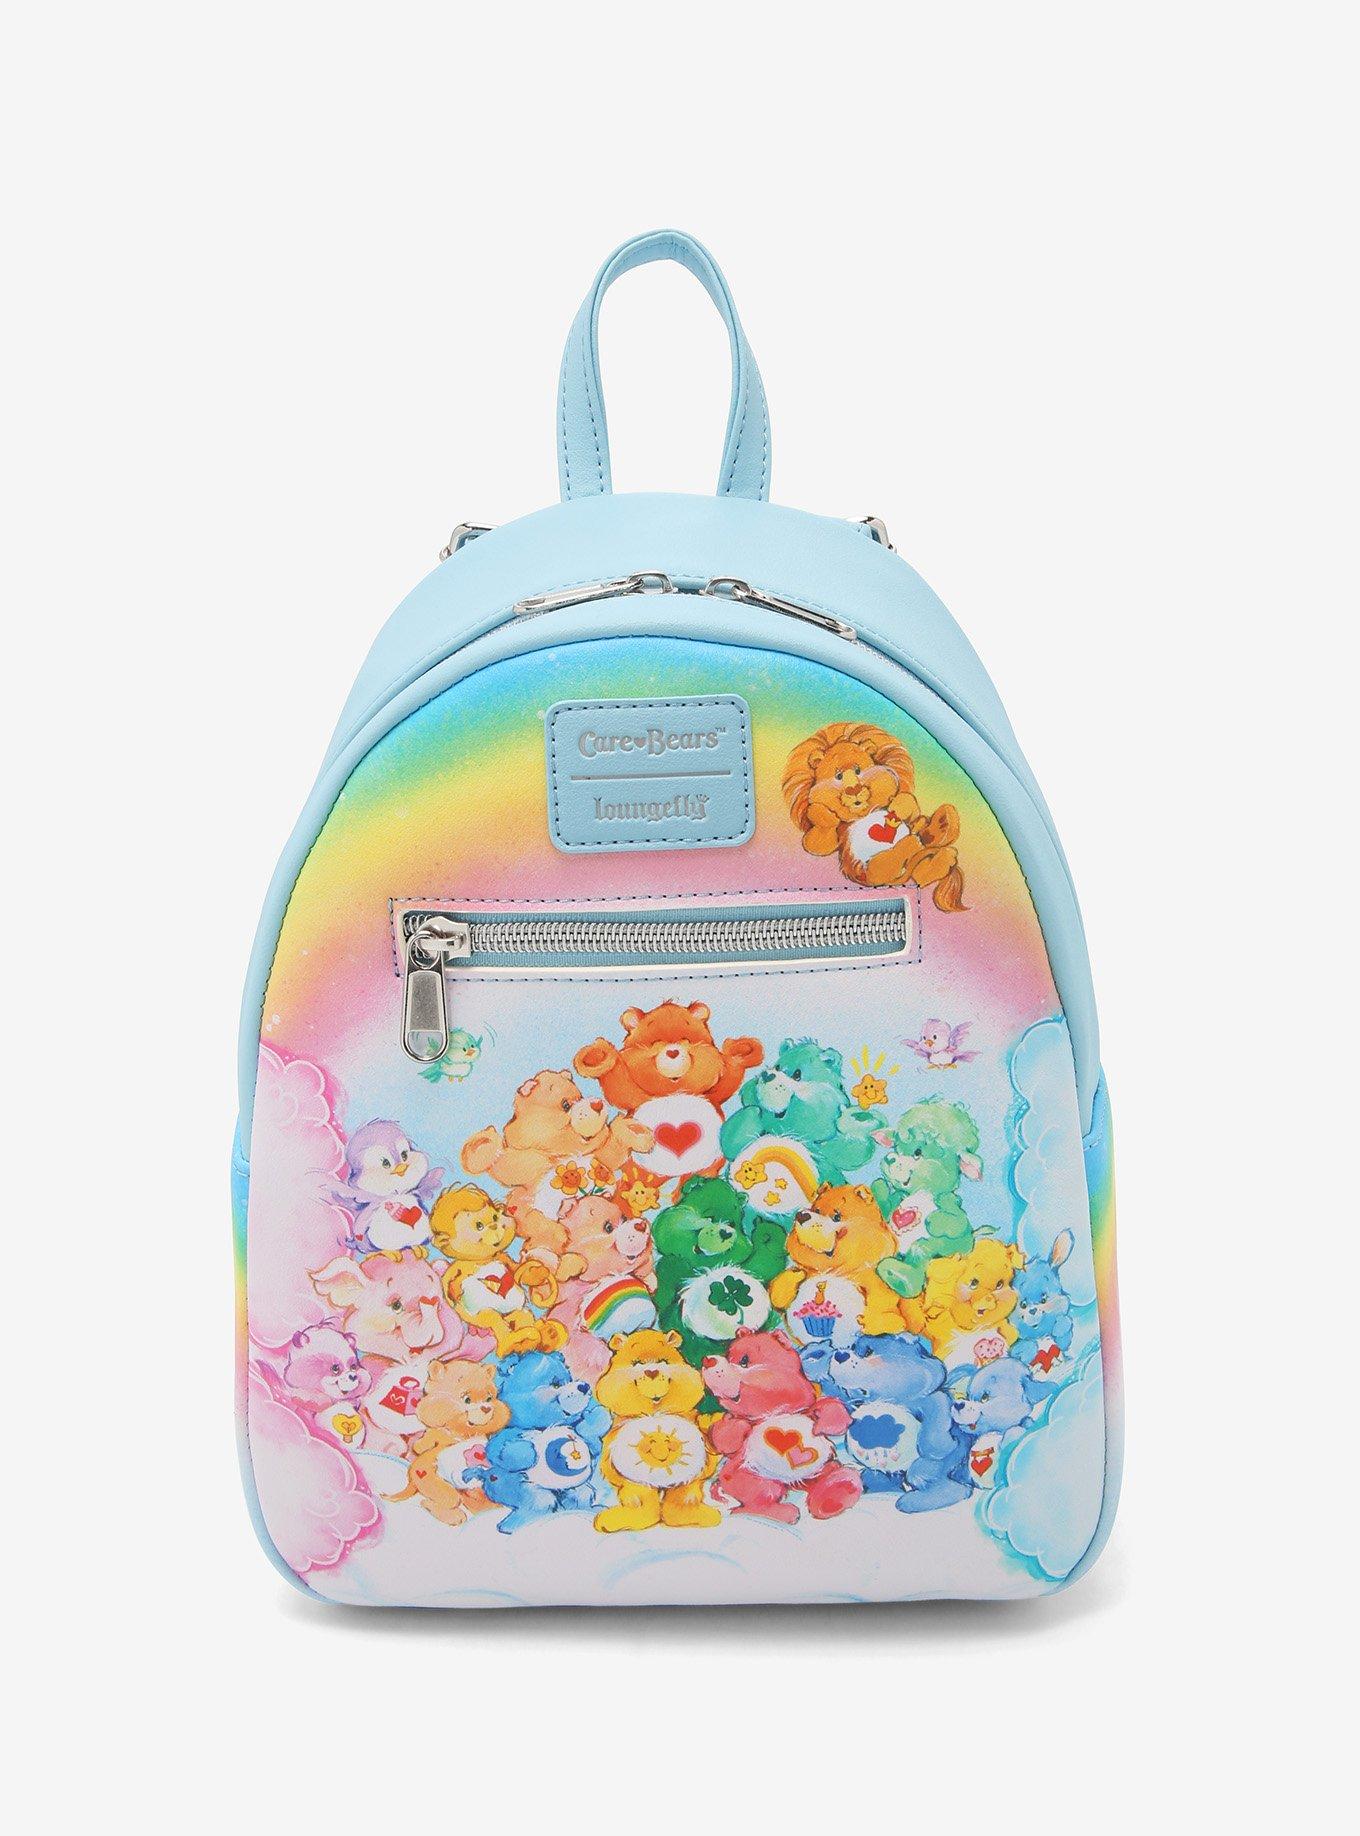 Buy Care Bears x Sanrio Exclusive Hello Kitty & Friends Care-A-Lot Mini  Backpack at Loungefly.